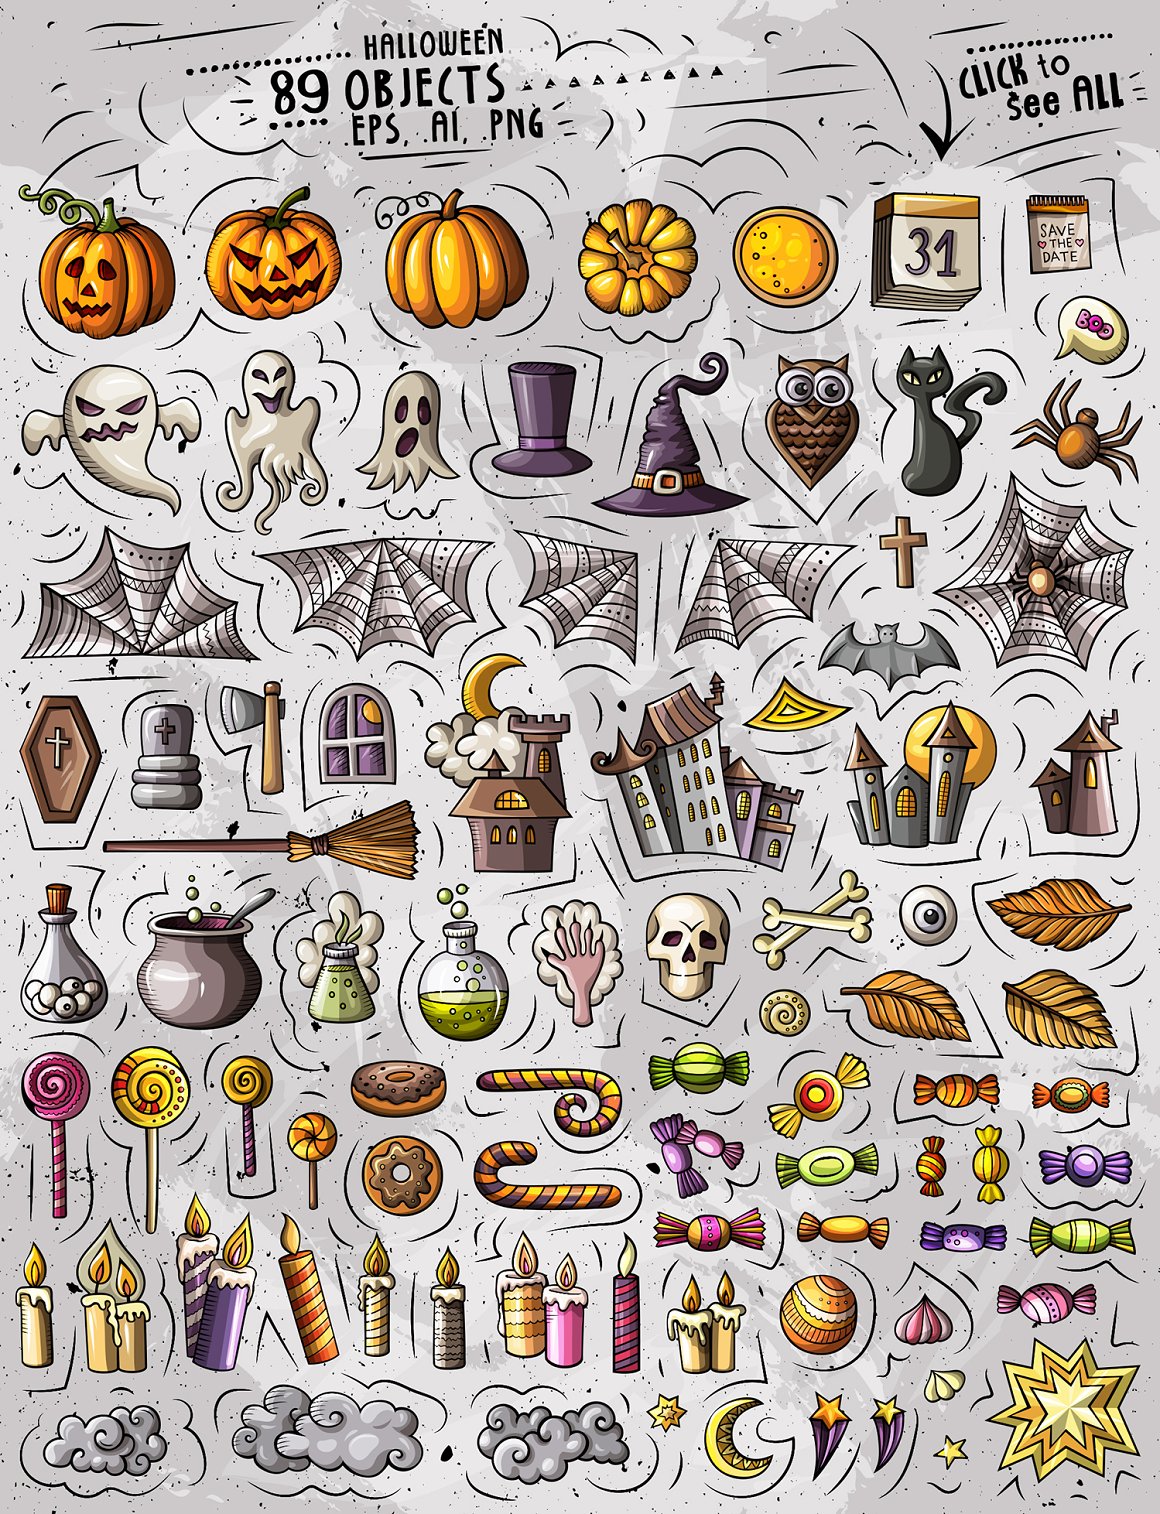 Icons with images of monster attributes.